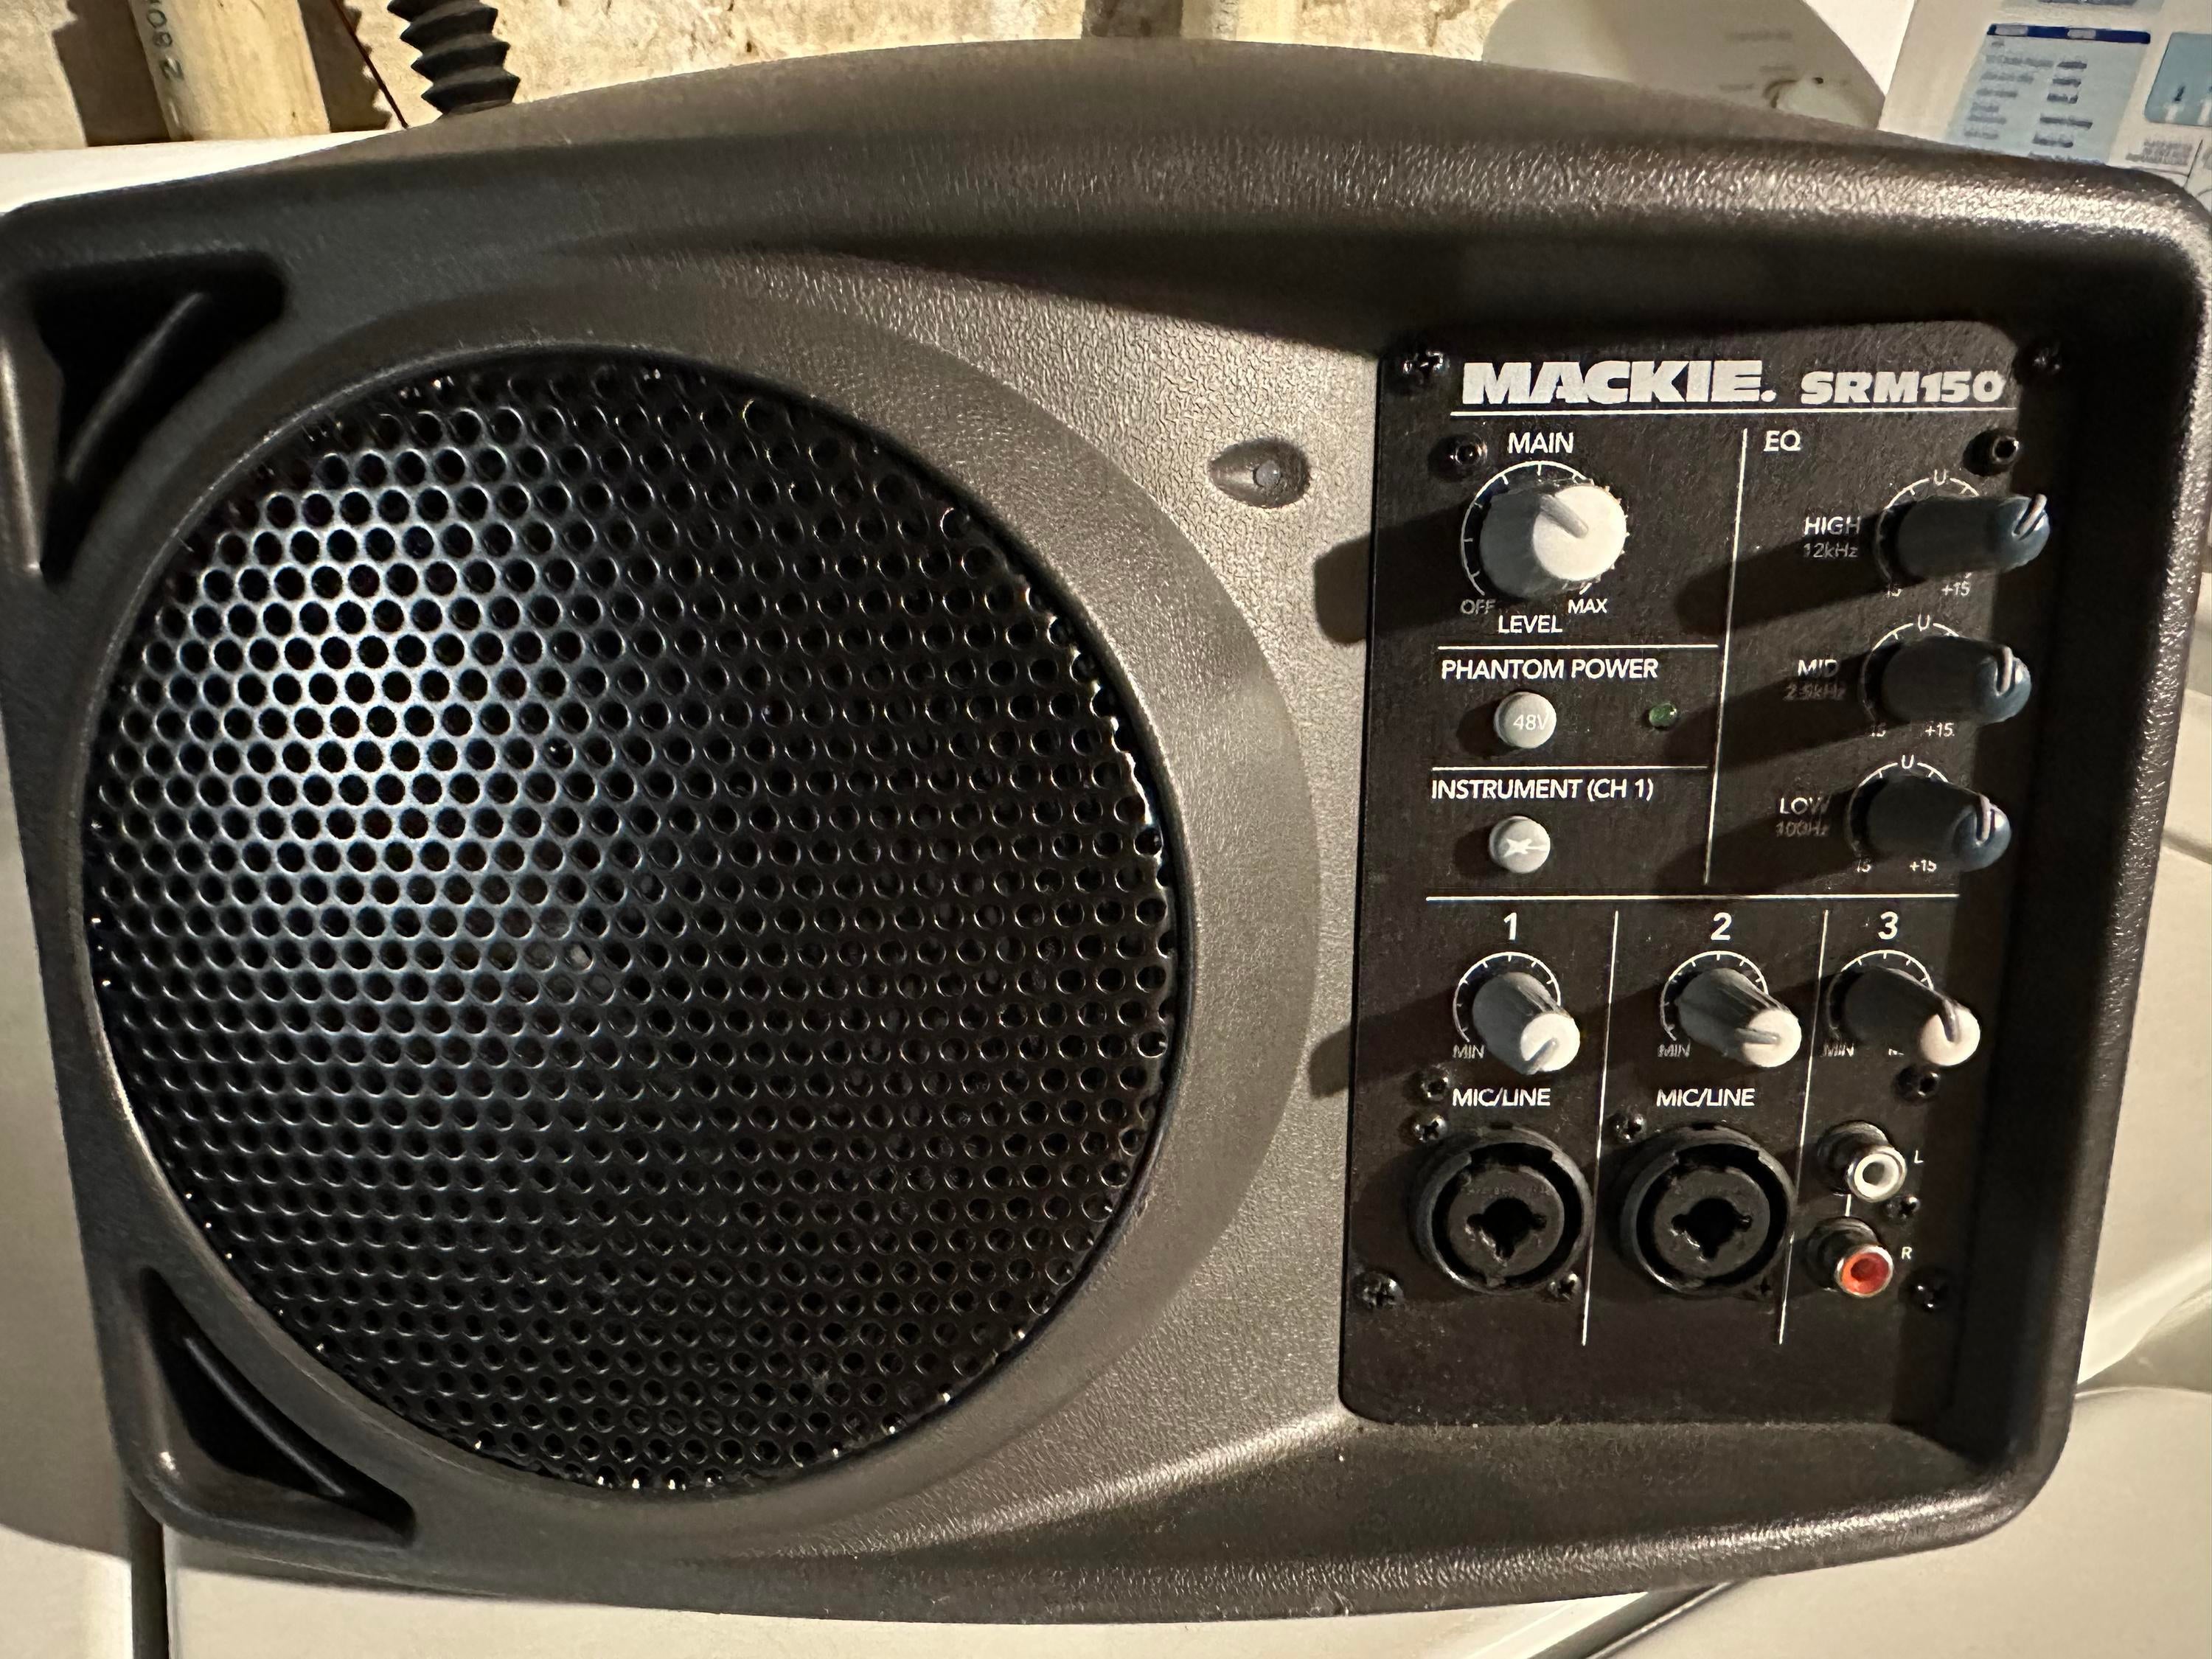 Used Mackie 2/2 - SRM150 150W 5.25 inch Compact Powered PA System